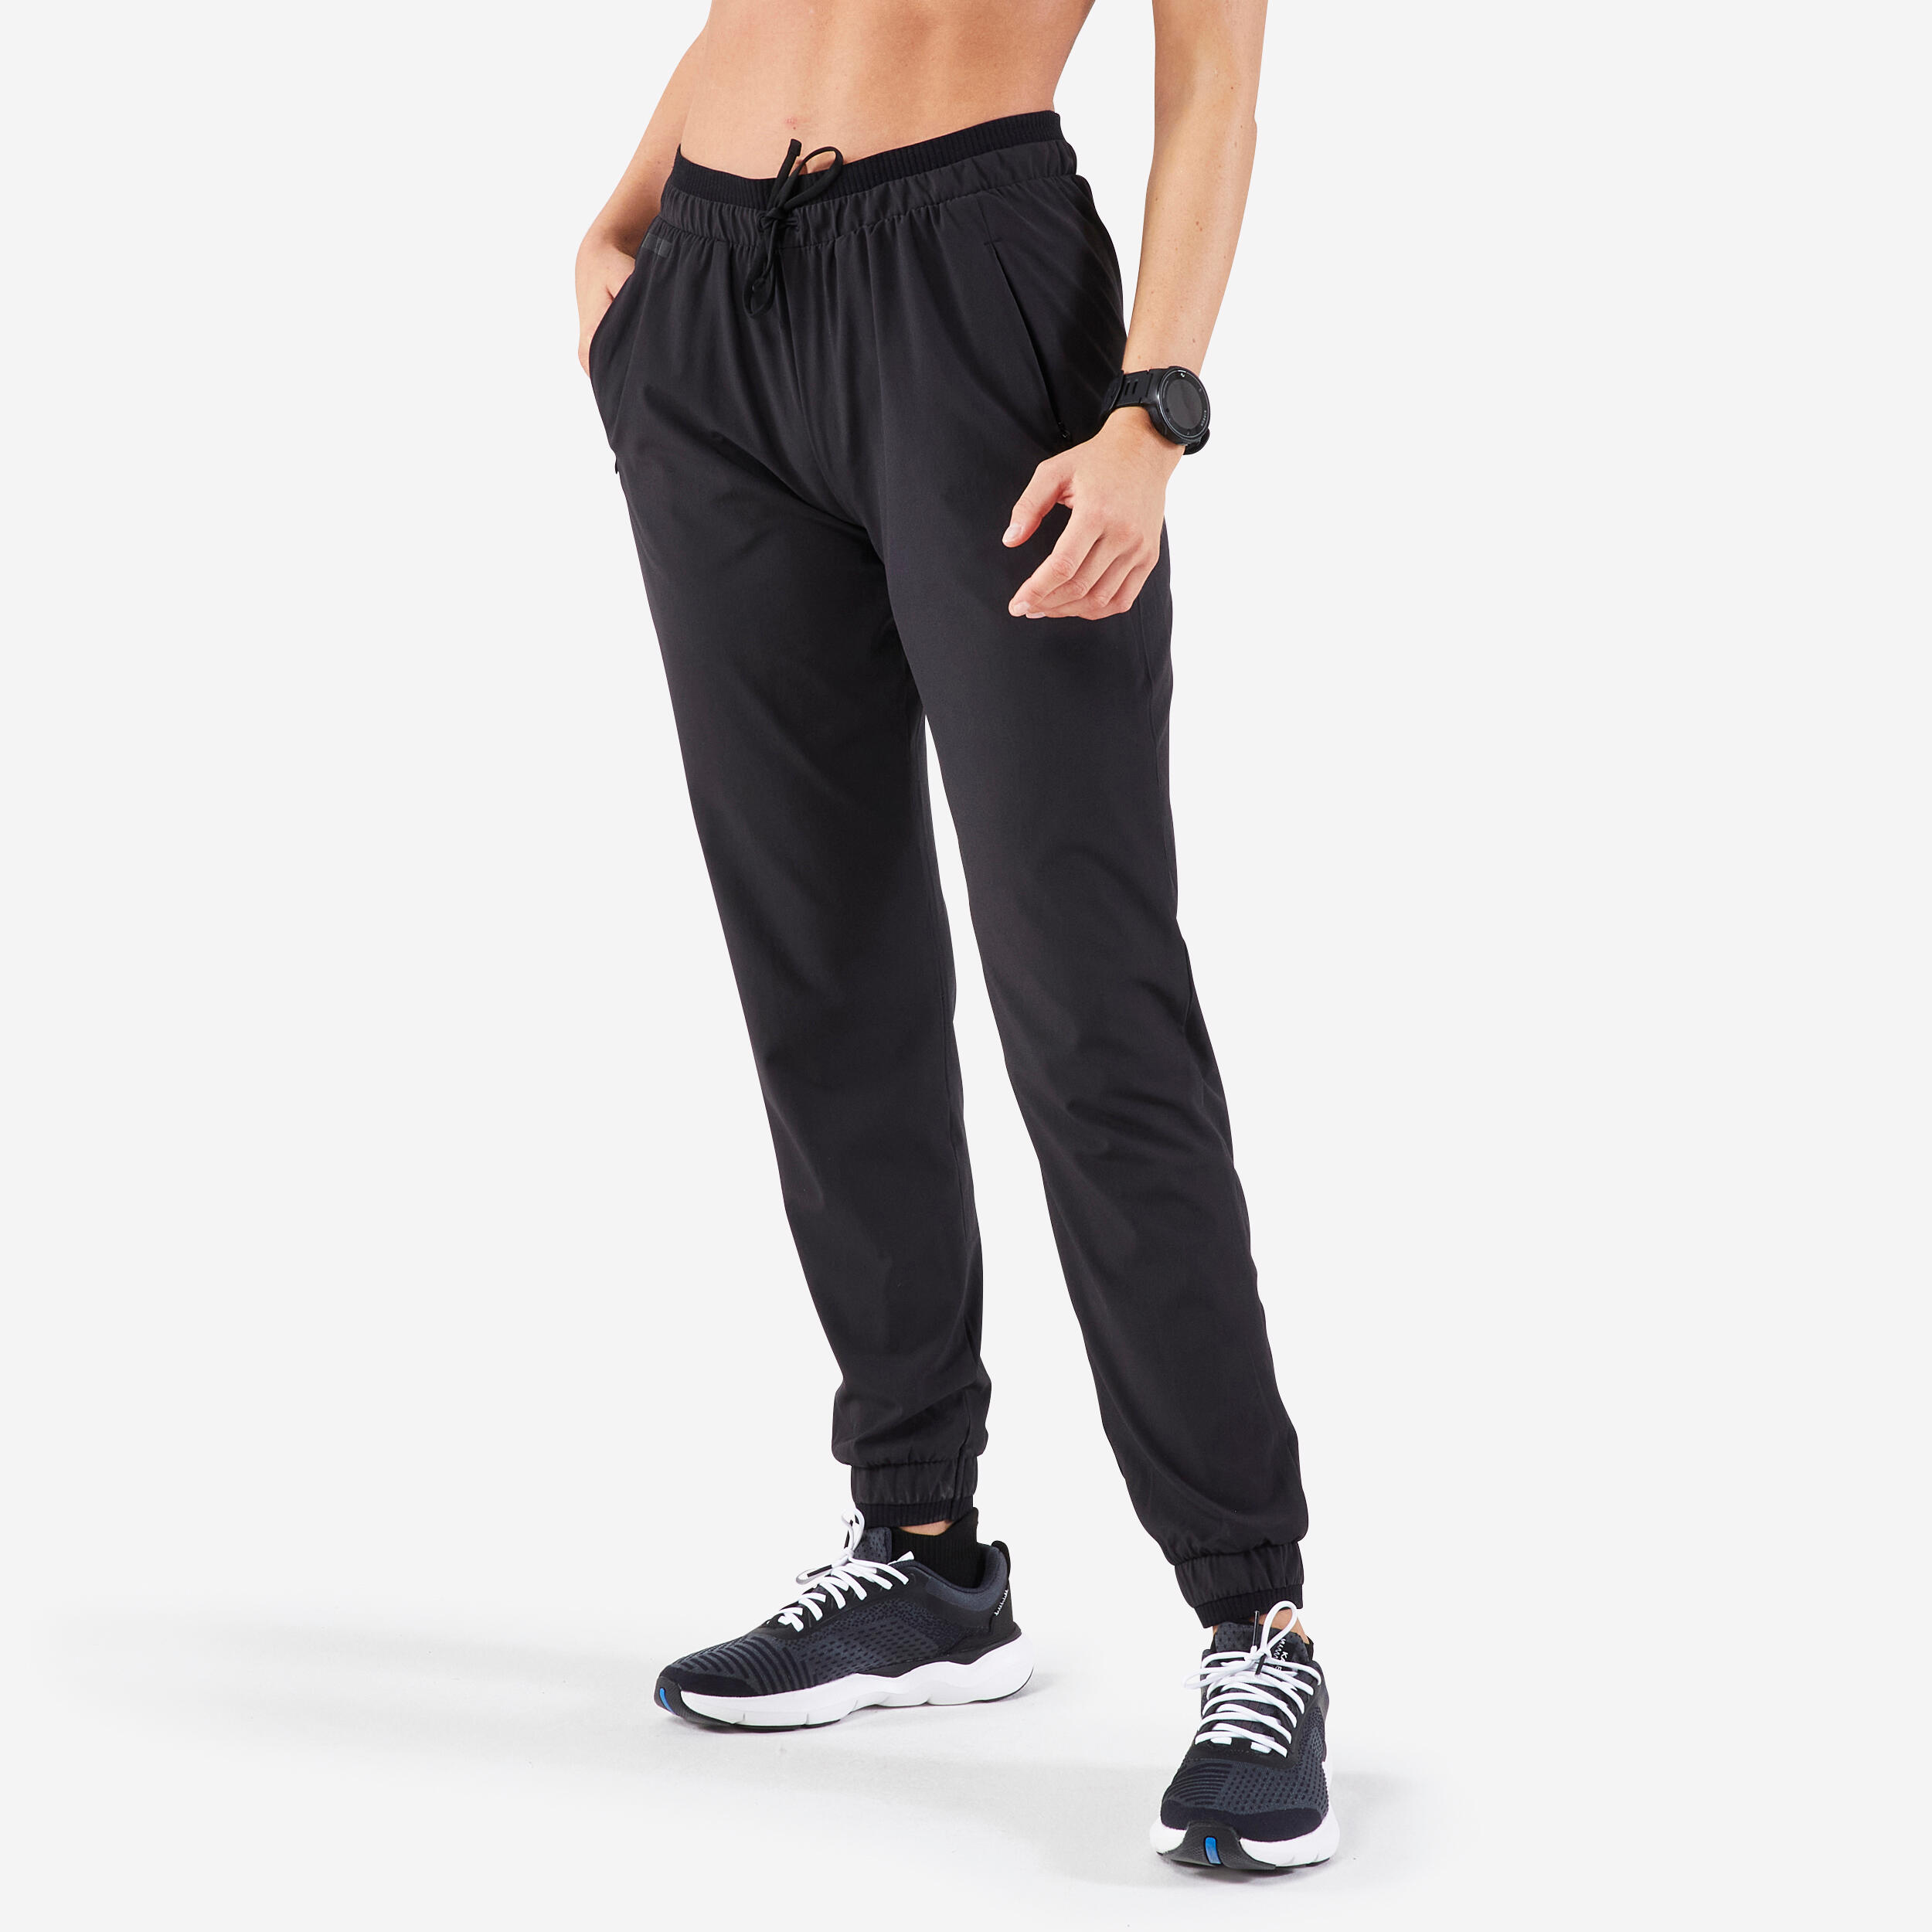 Kalenji Womens Track Pants in Bhopal - Dealers, Manufacturers & Suppliers -  Justdial